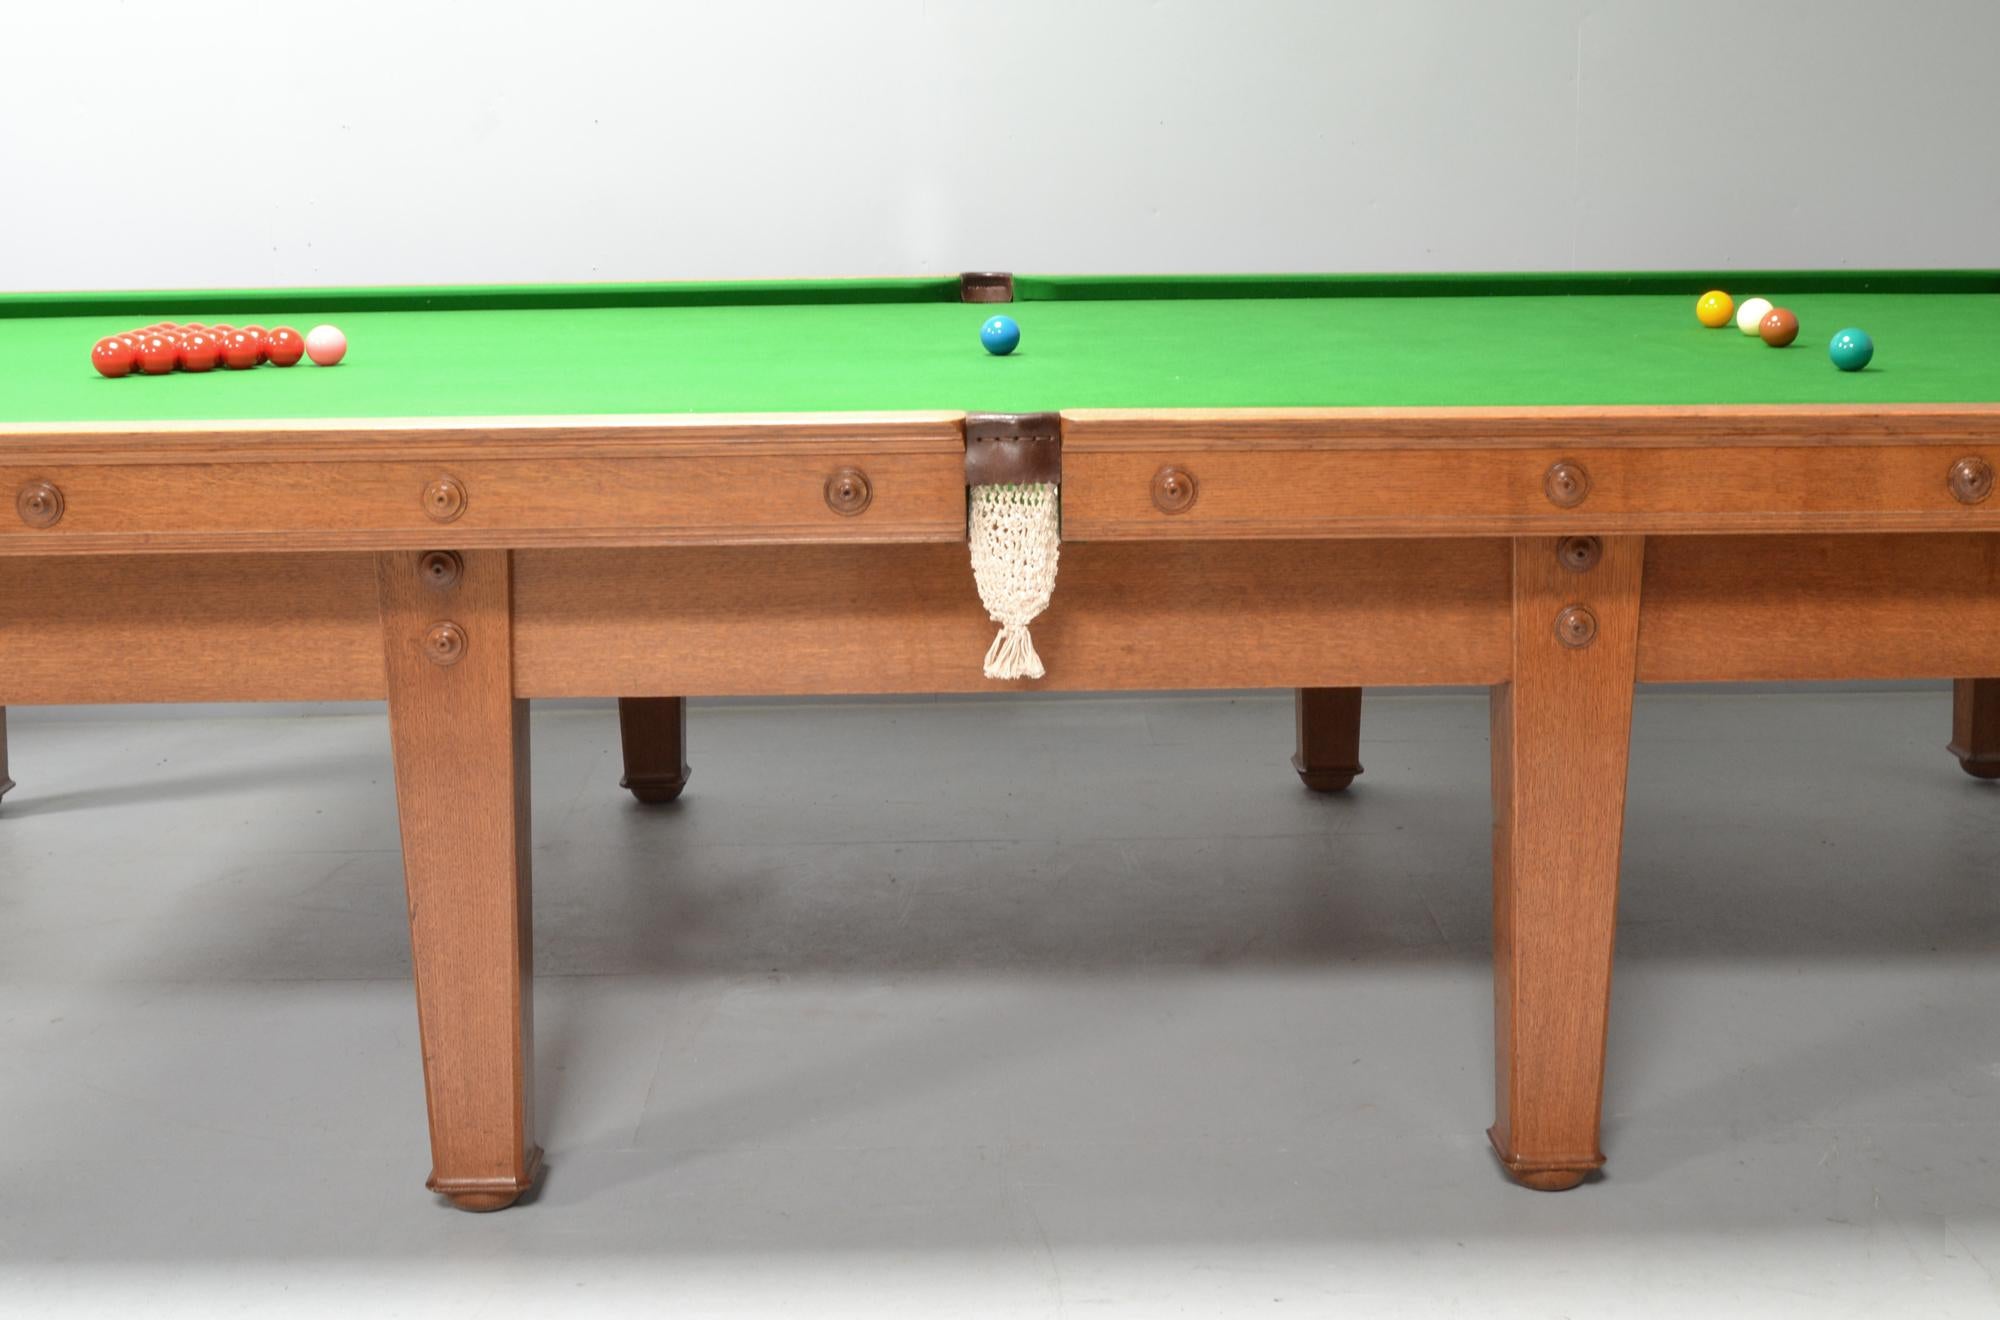 8ft pool table dimensions